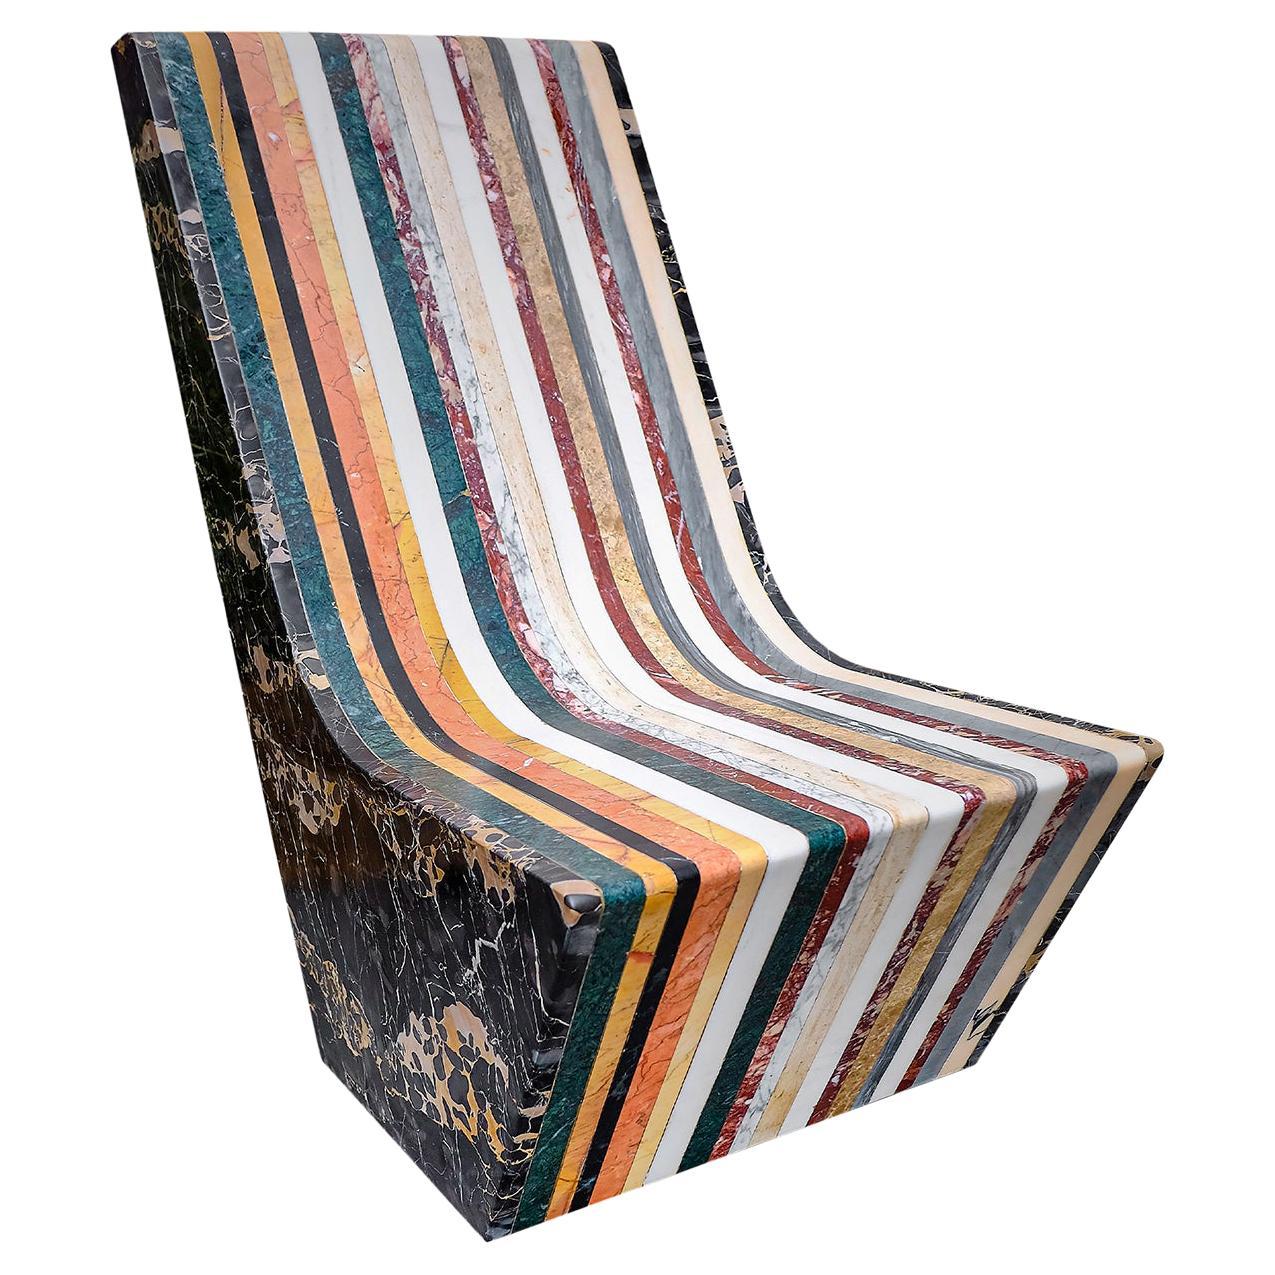 МАТРЁШКА Small Polychrome Marble Chair by M. Nocchi & G. Tazzini